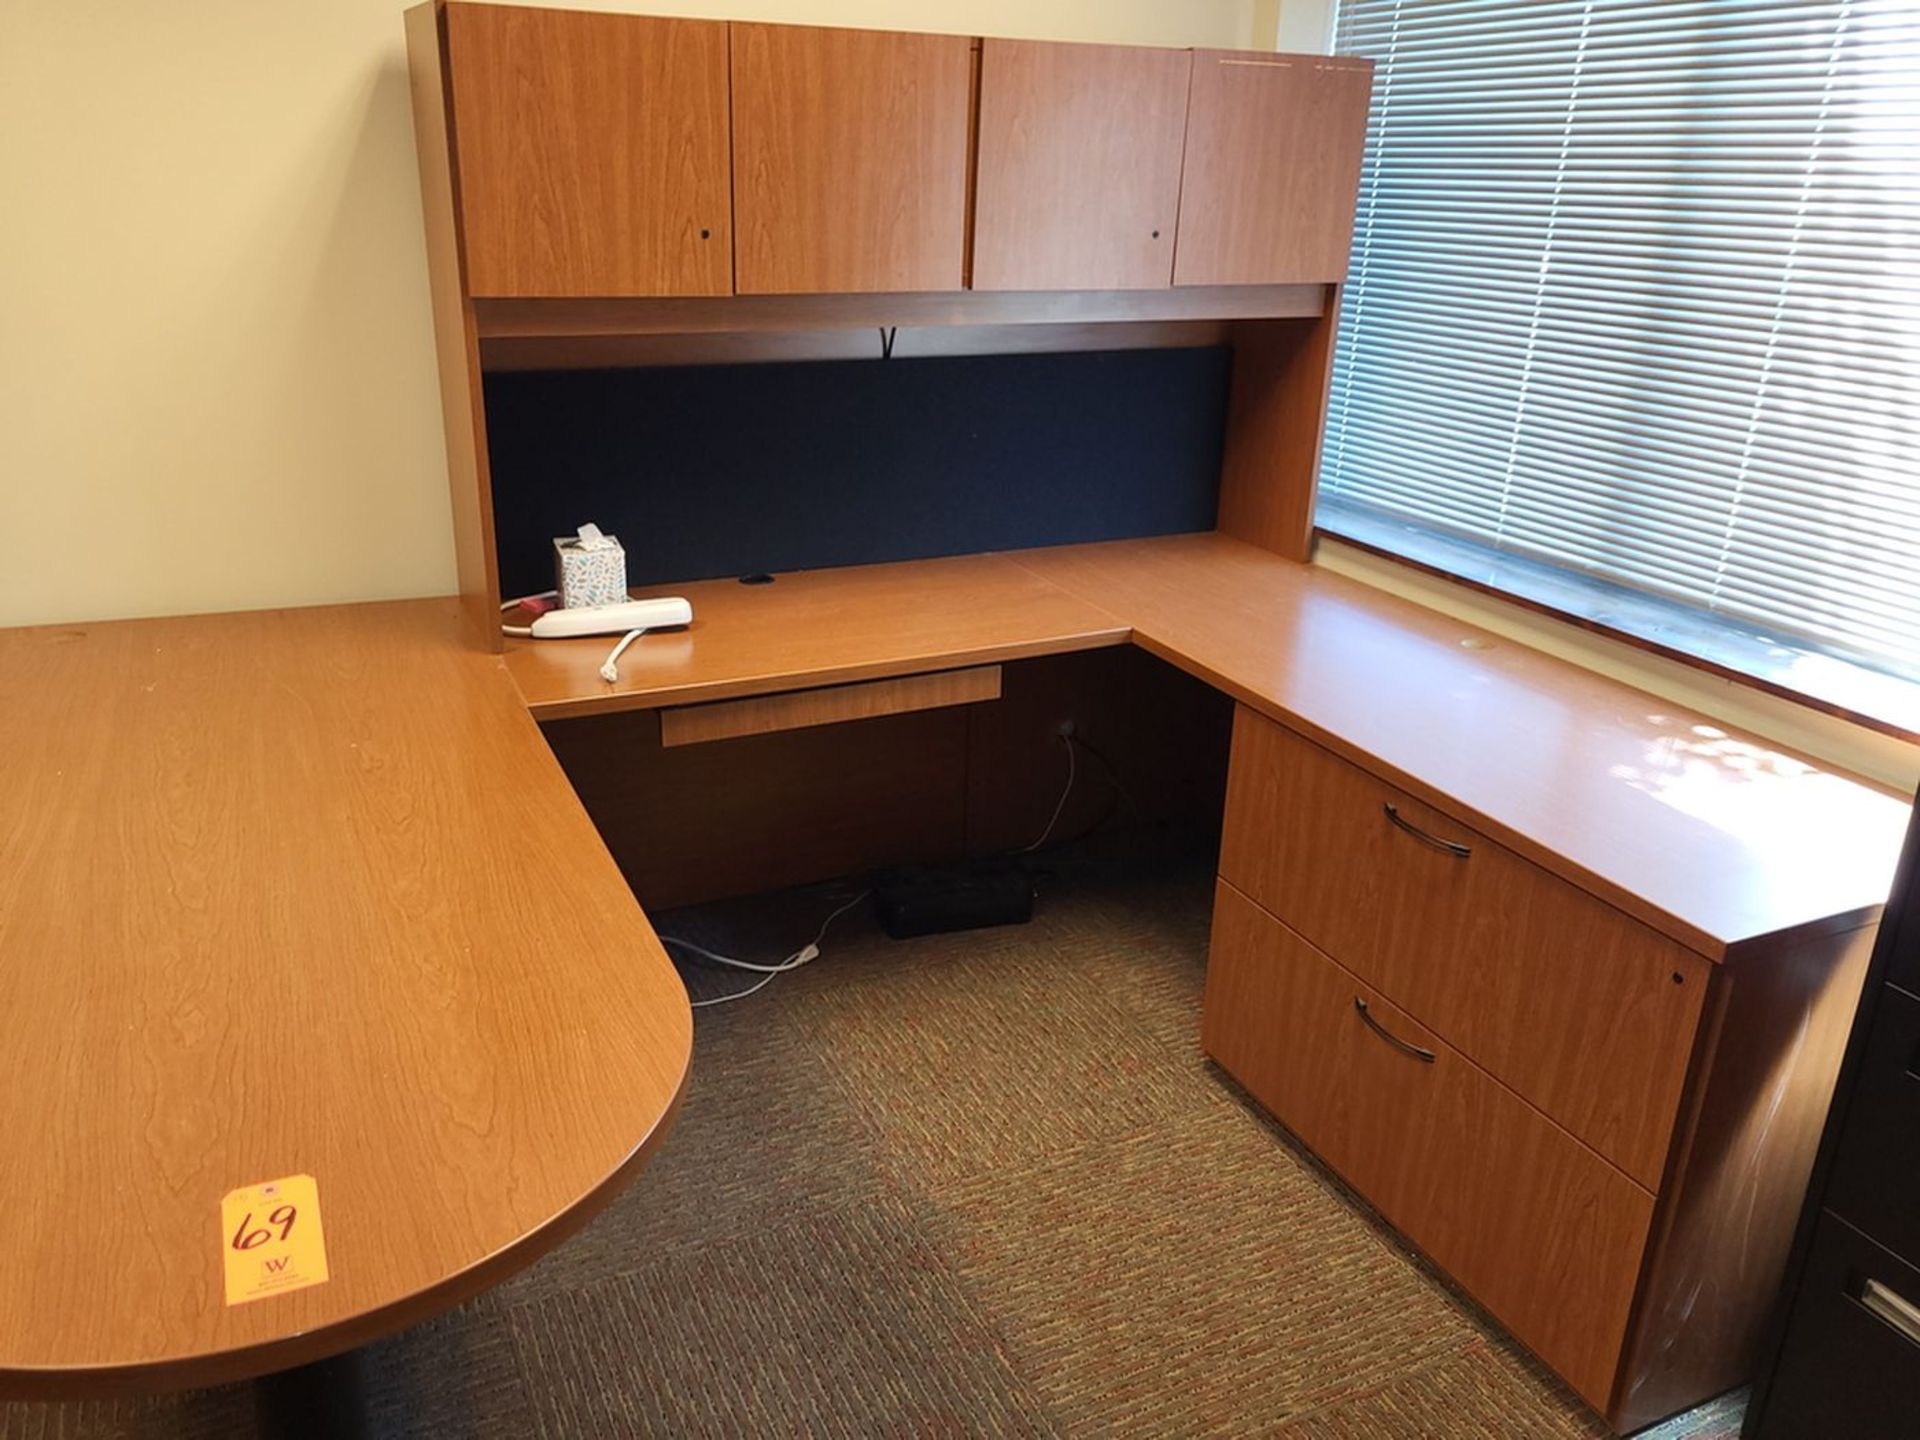 National WaveWorks Wrap-Around Executive Wood Desk; (No Chair) - Image 2 of 2